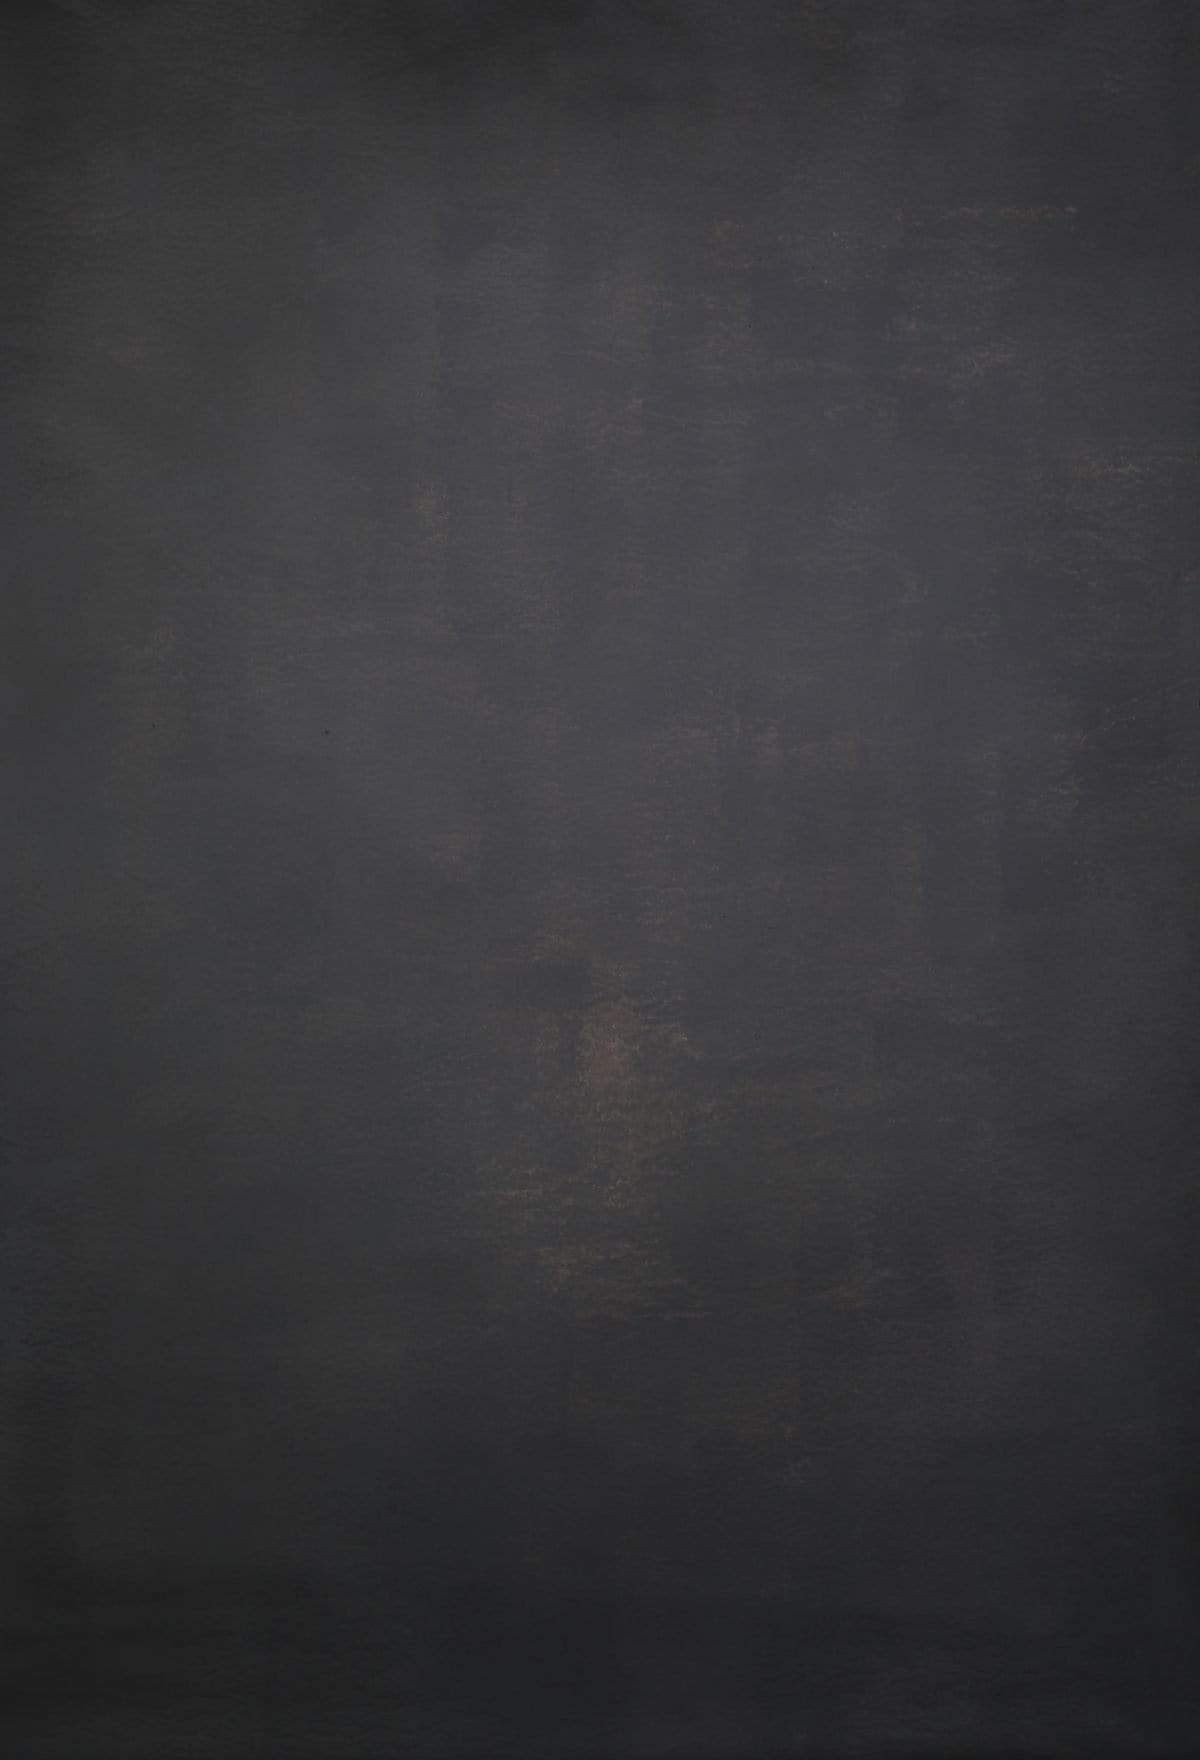 Kate Dark Brownish/Gray Abstract Backdrop for Photography